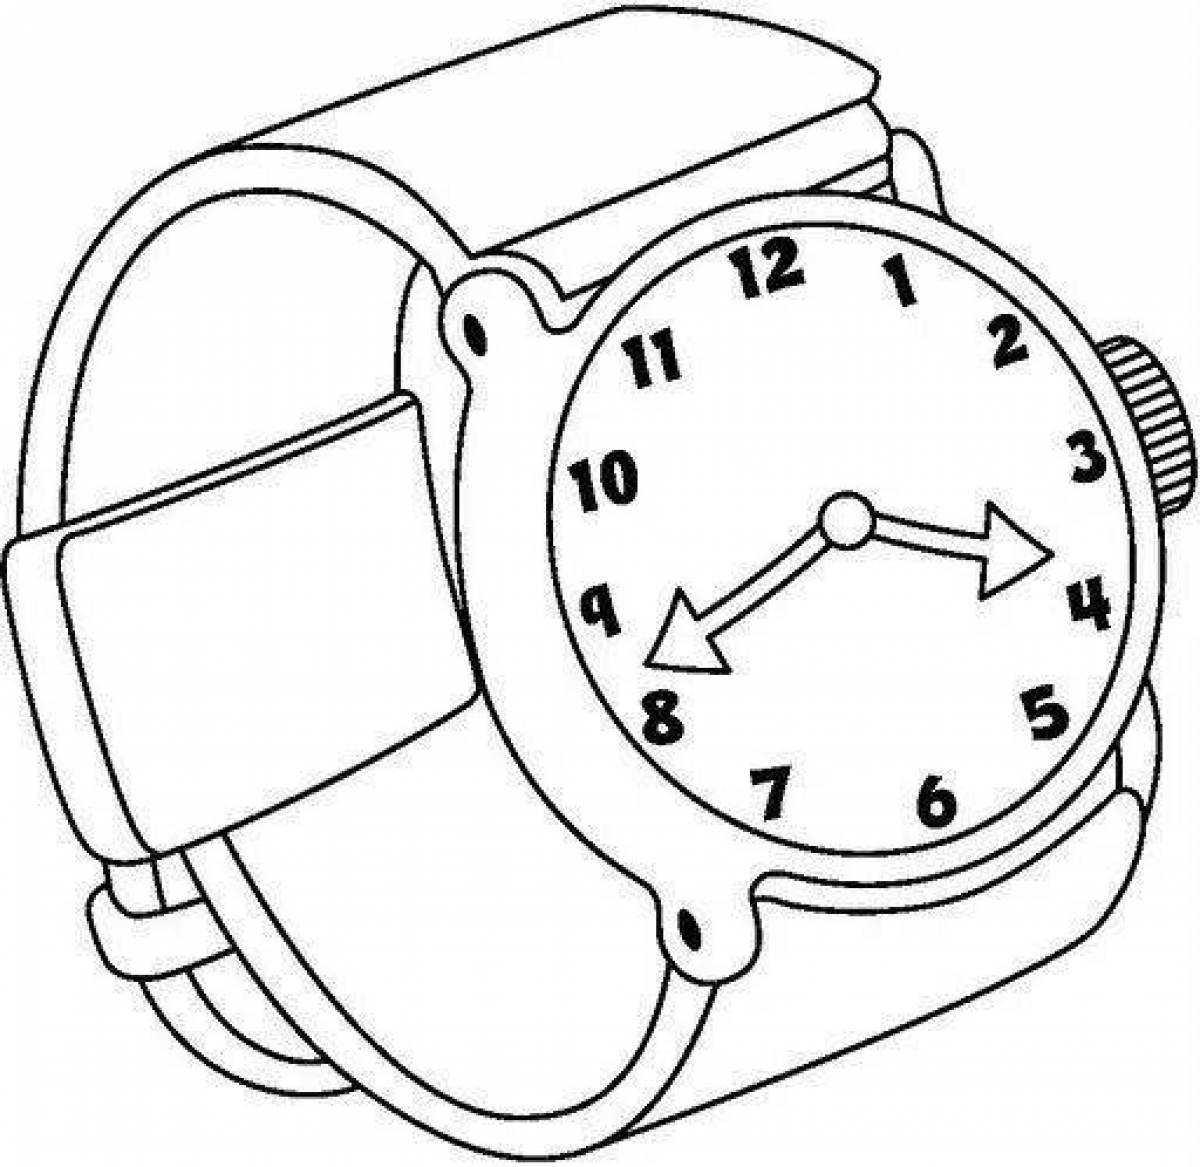 Coloring book gorgeous watch